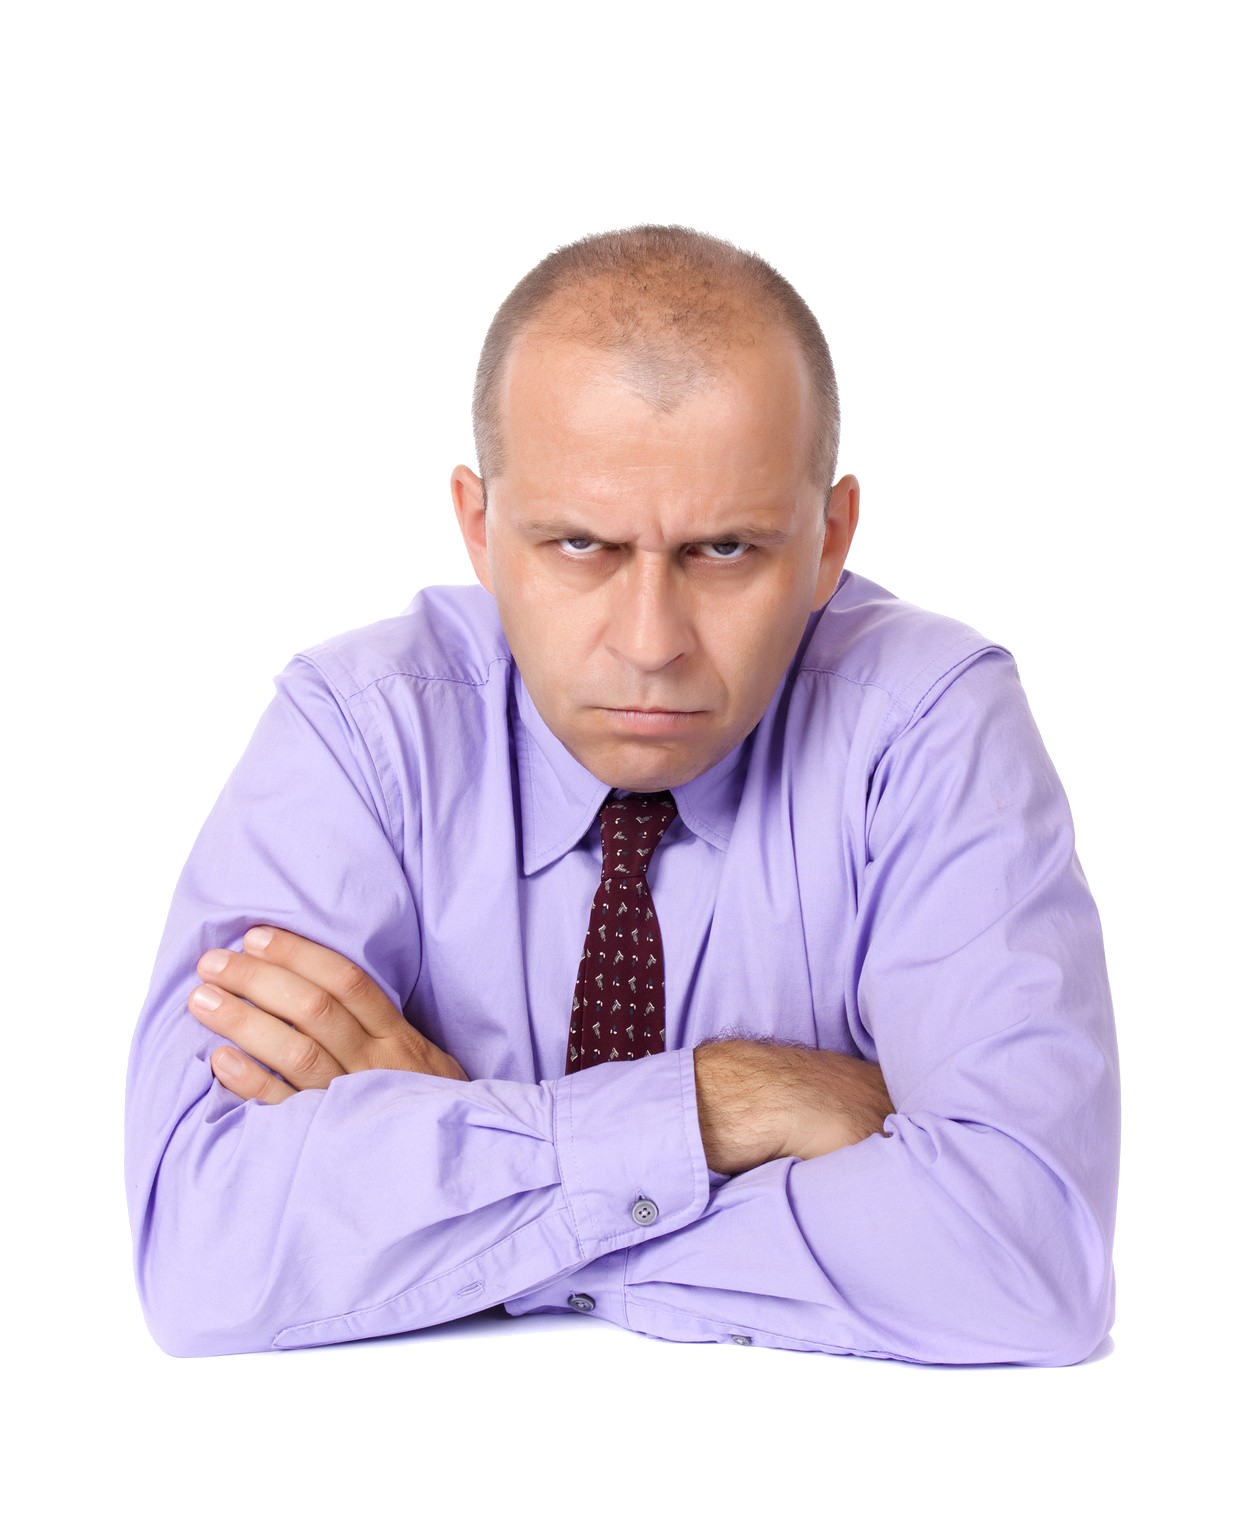 Angry Person PNG Transparent Picture